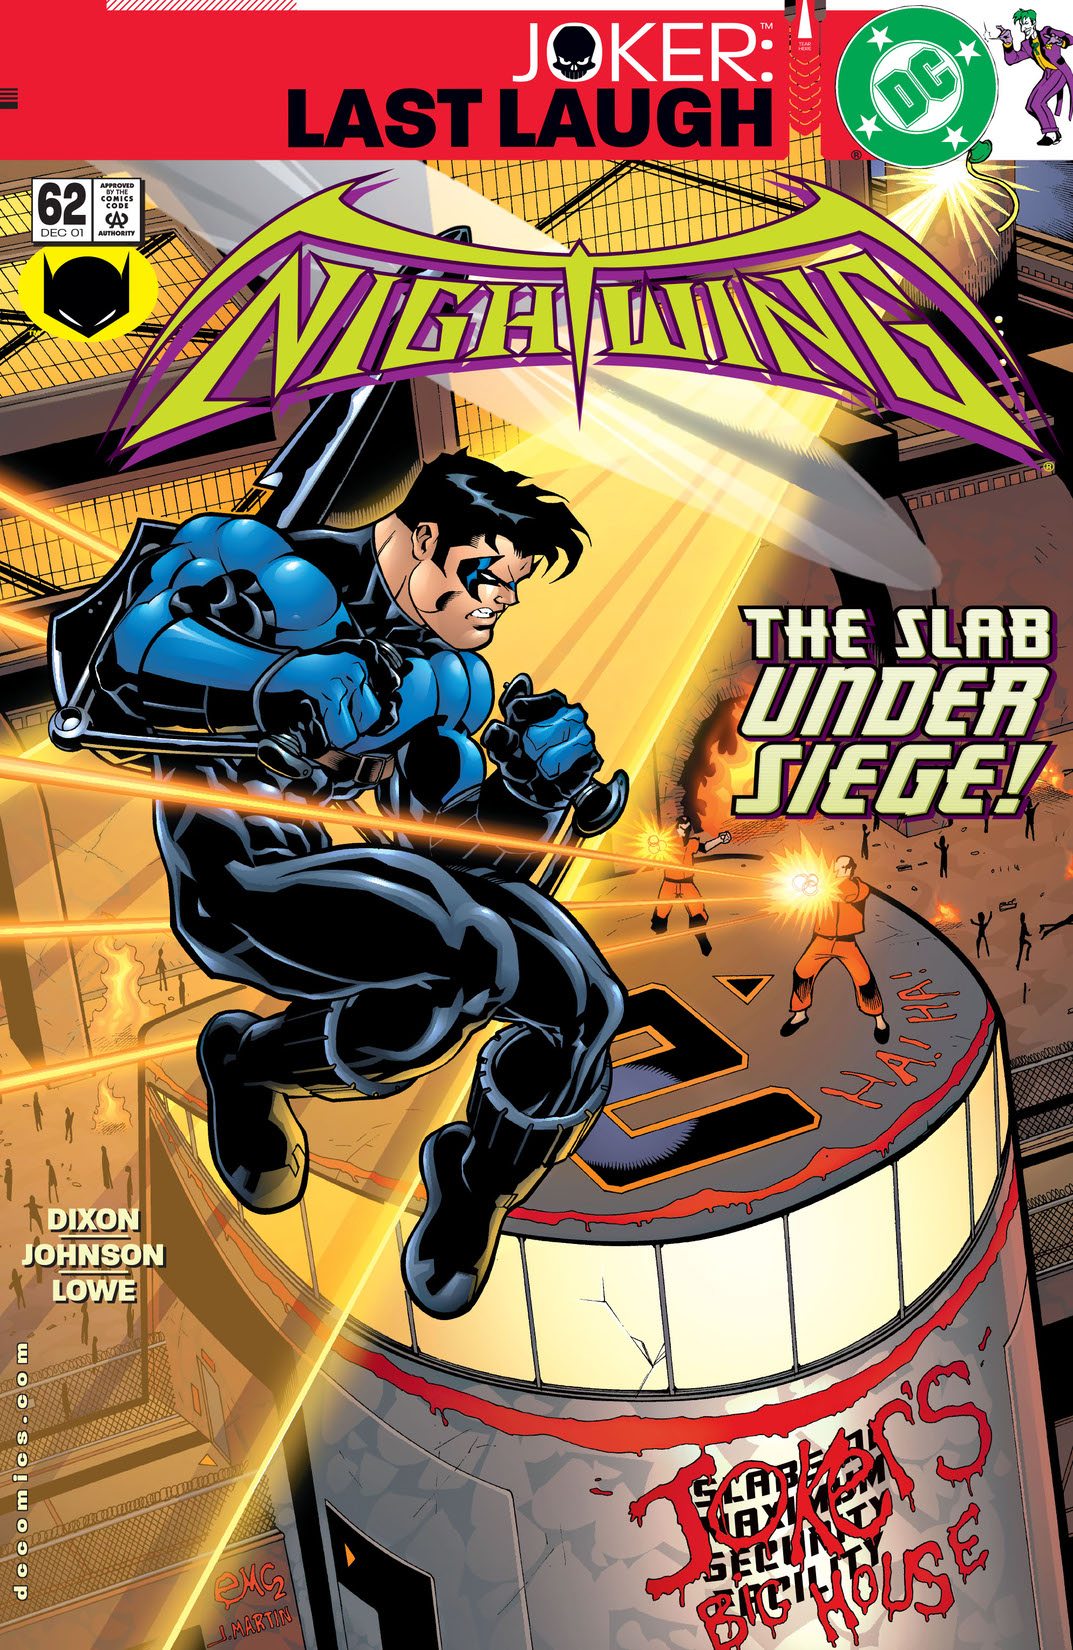 Nightwing (1996-) #62 preview images